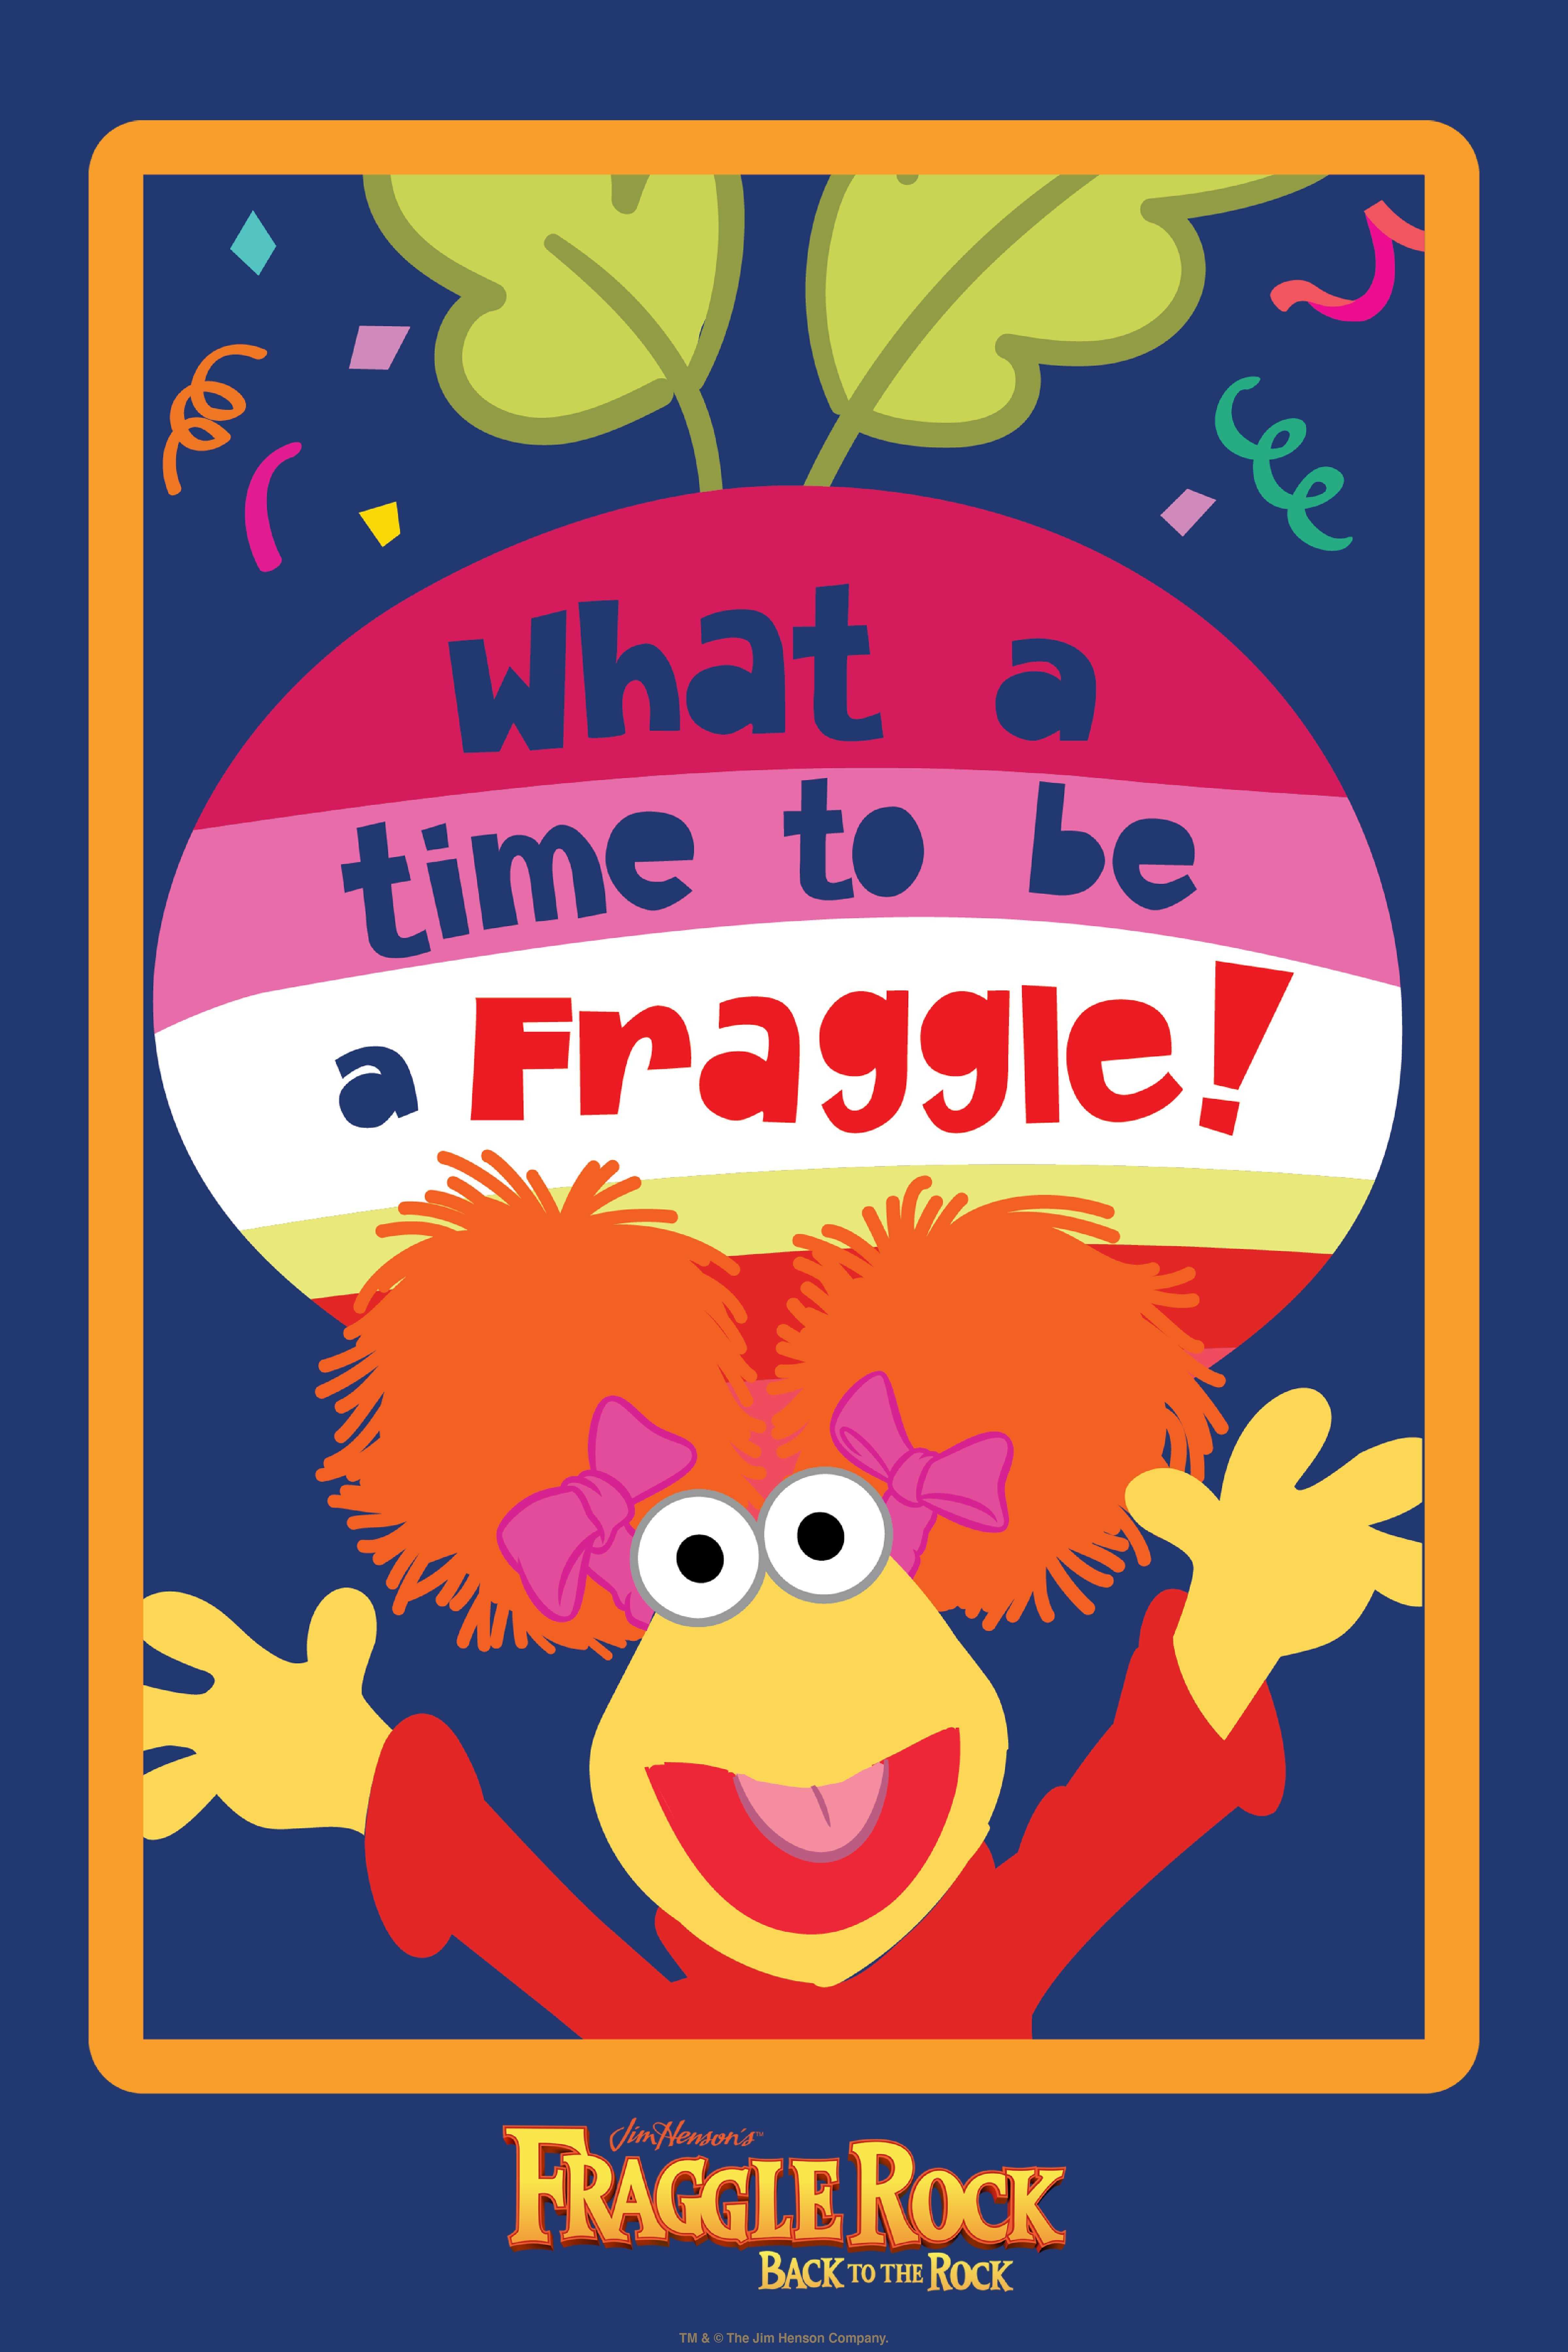 Jim Henson's Fraggle Rock Back To The Rock What A Time To Be A Fraggle! Poster, , hi-res